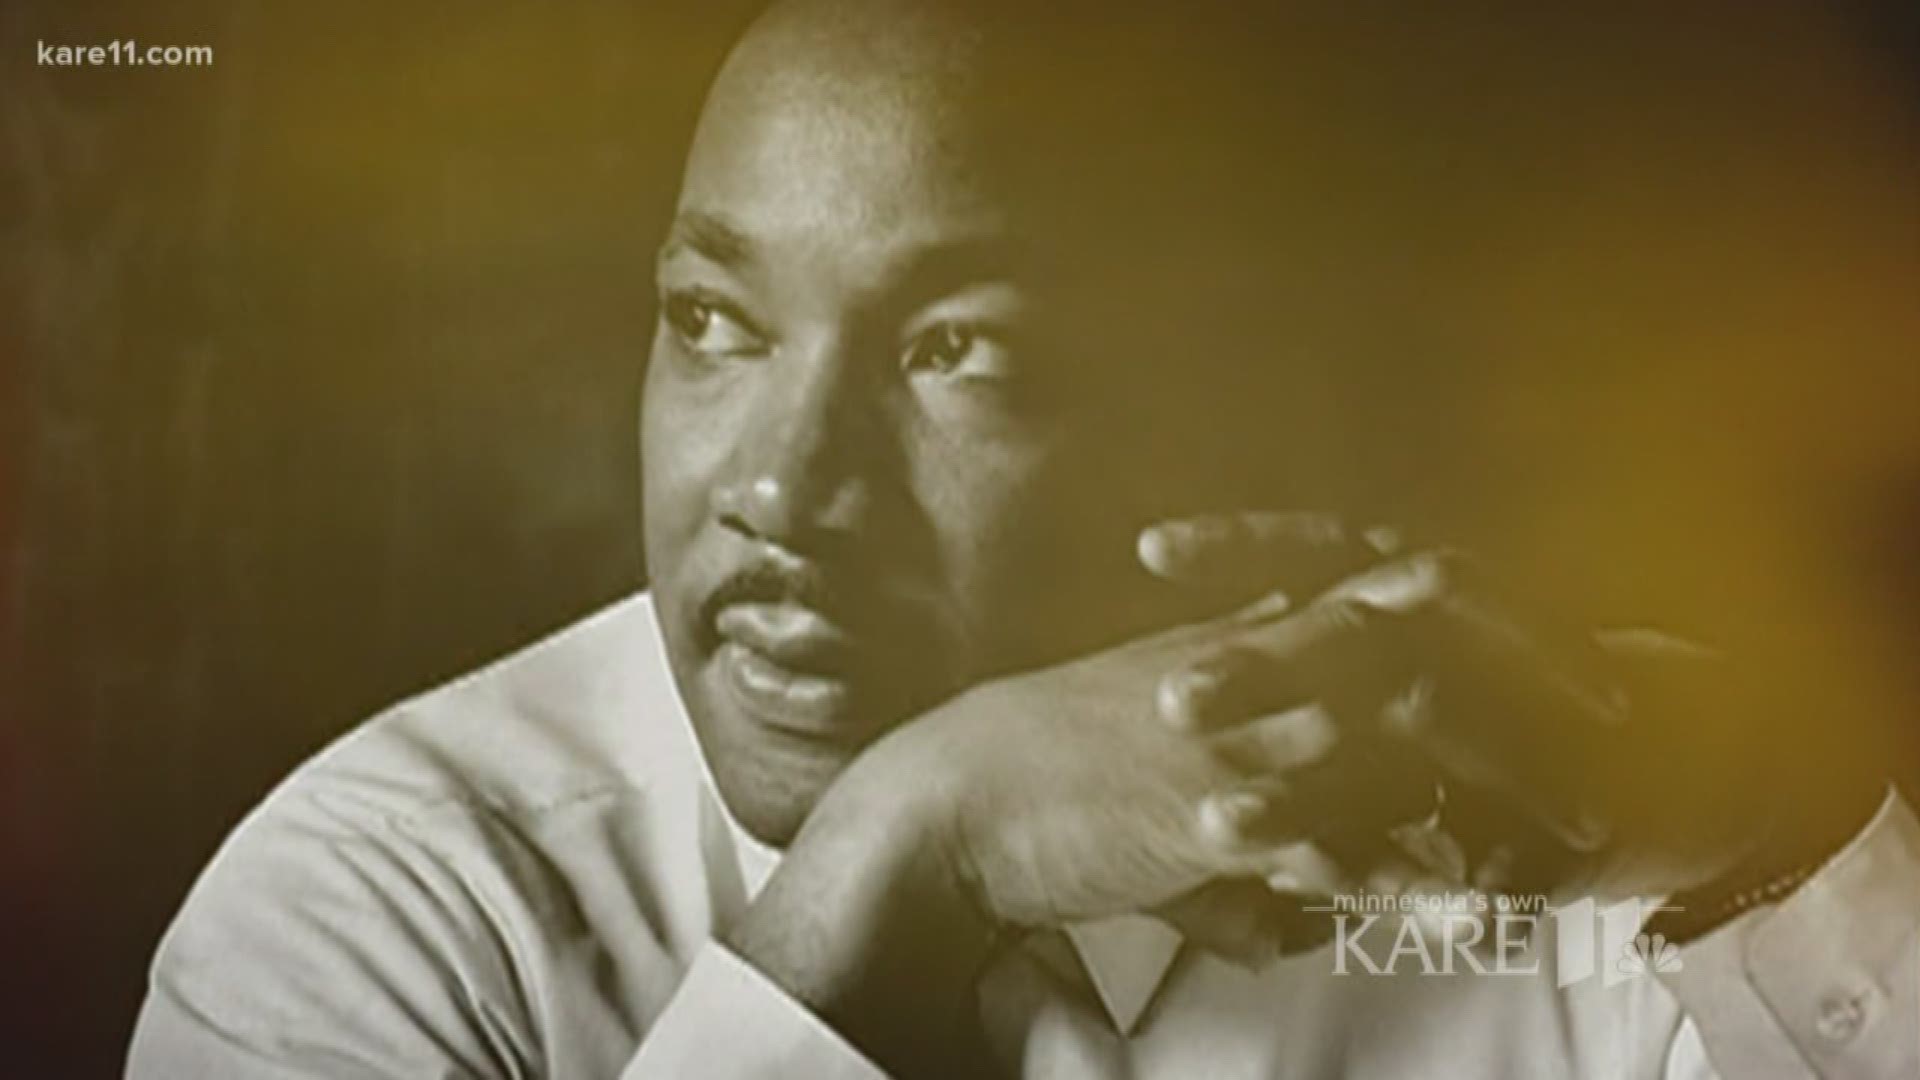 Dr. King's Legacy: How far have we come?